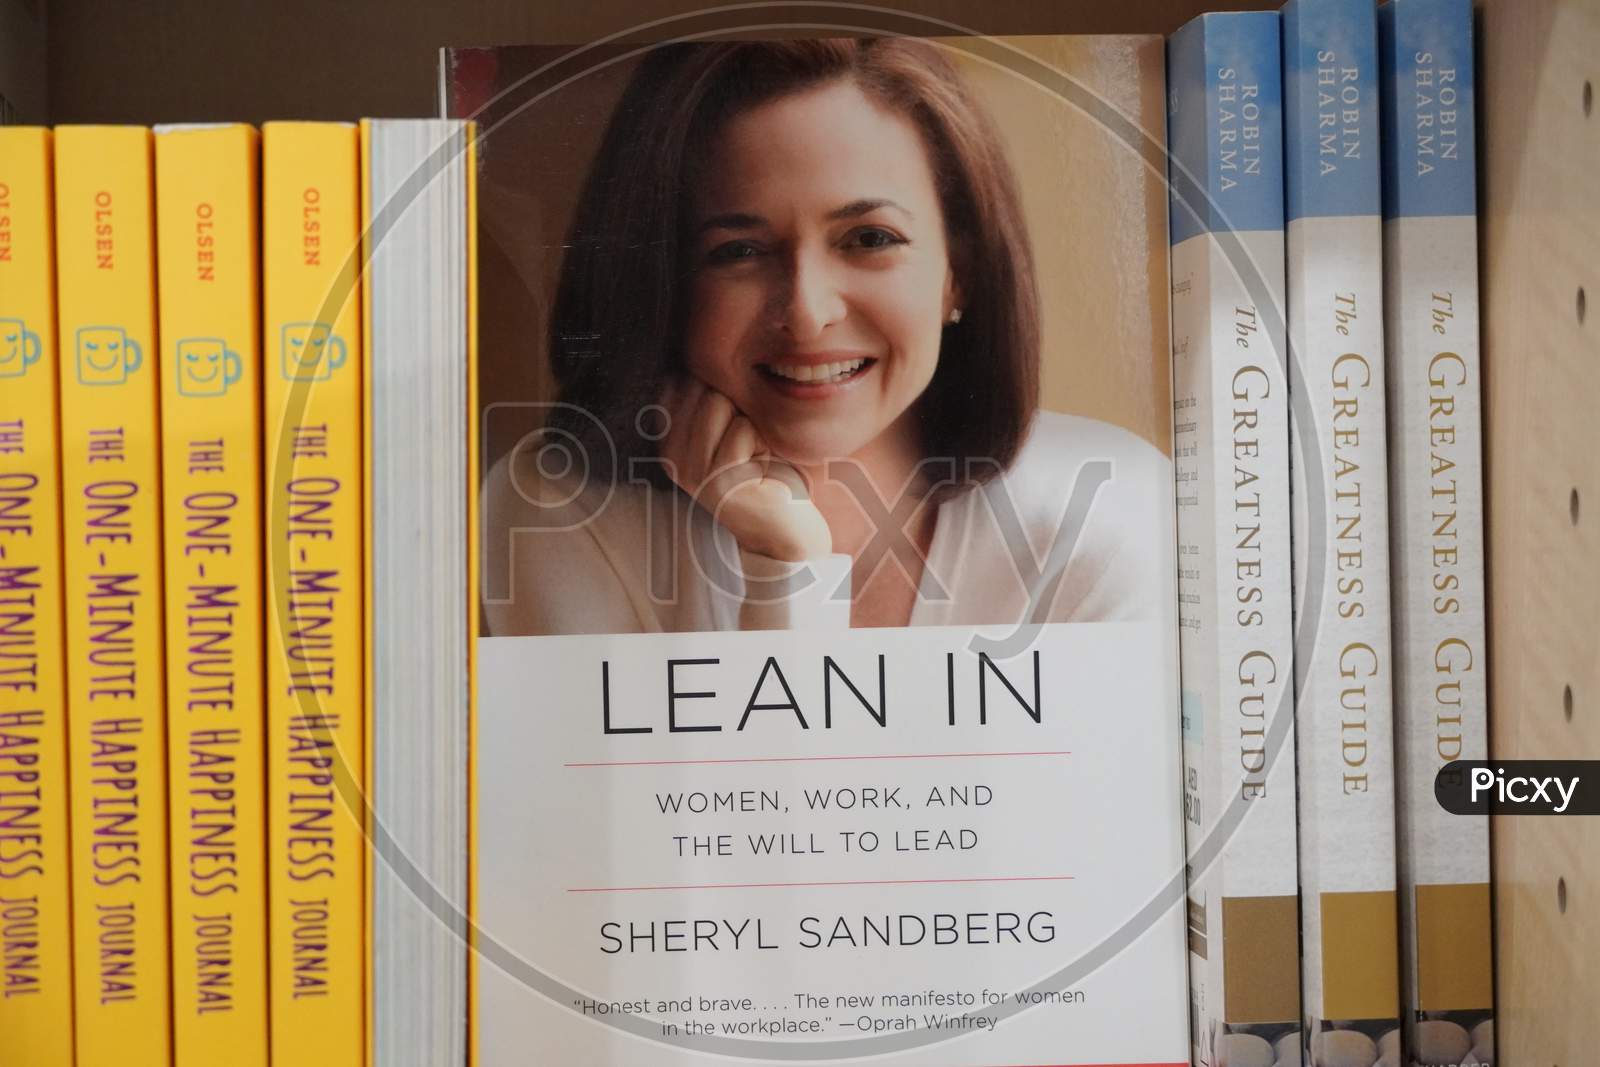 Dubai Uae December 2019 Lean In Book By Sheryl Sandberg Coo Of Facebook Displayed For Sale At Book Store. Book Showcased For Sale.